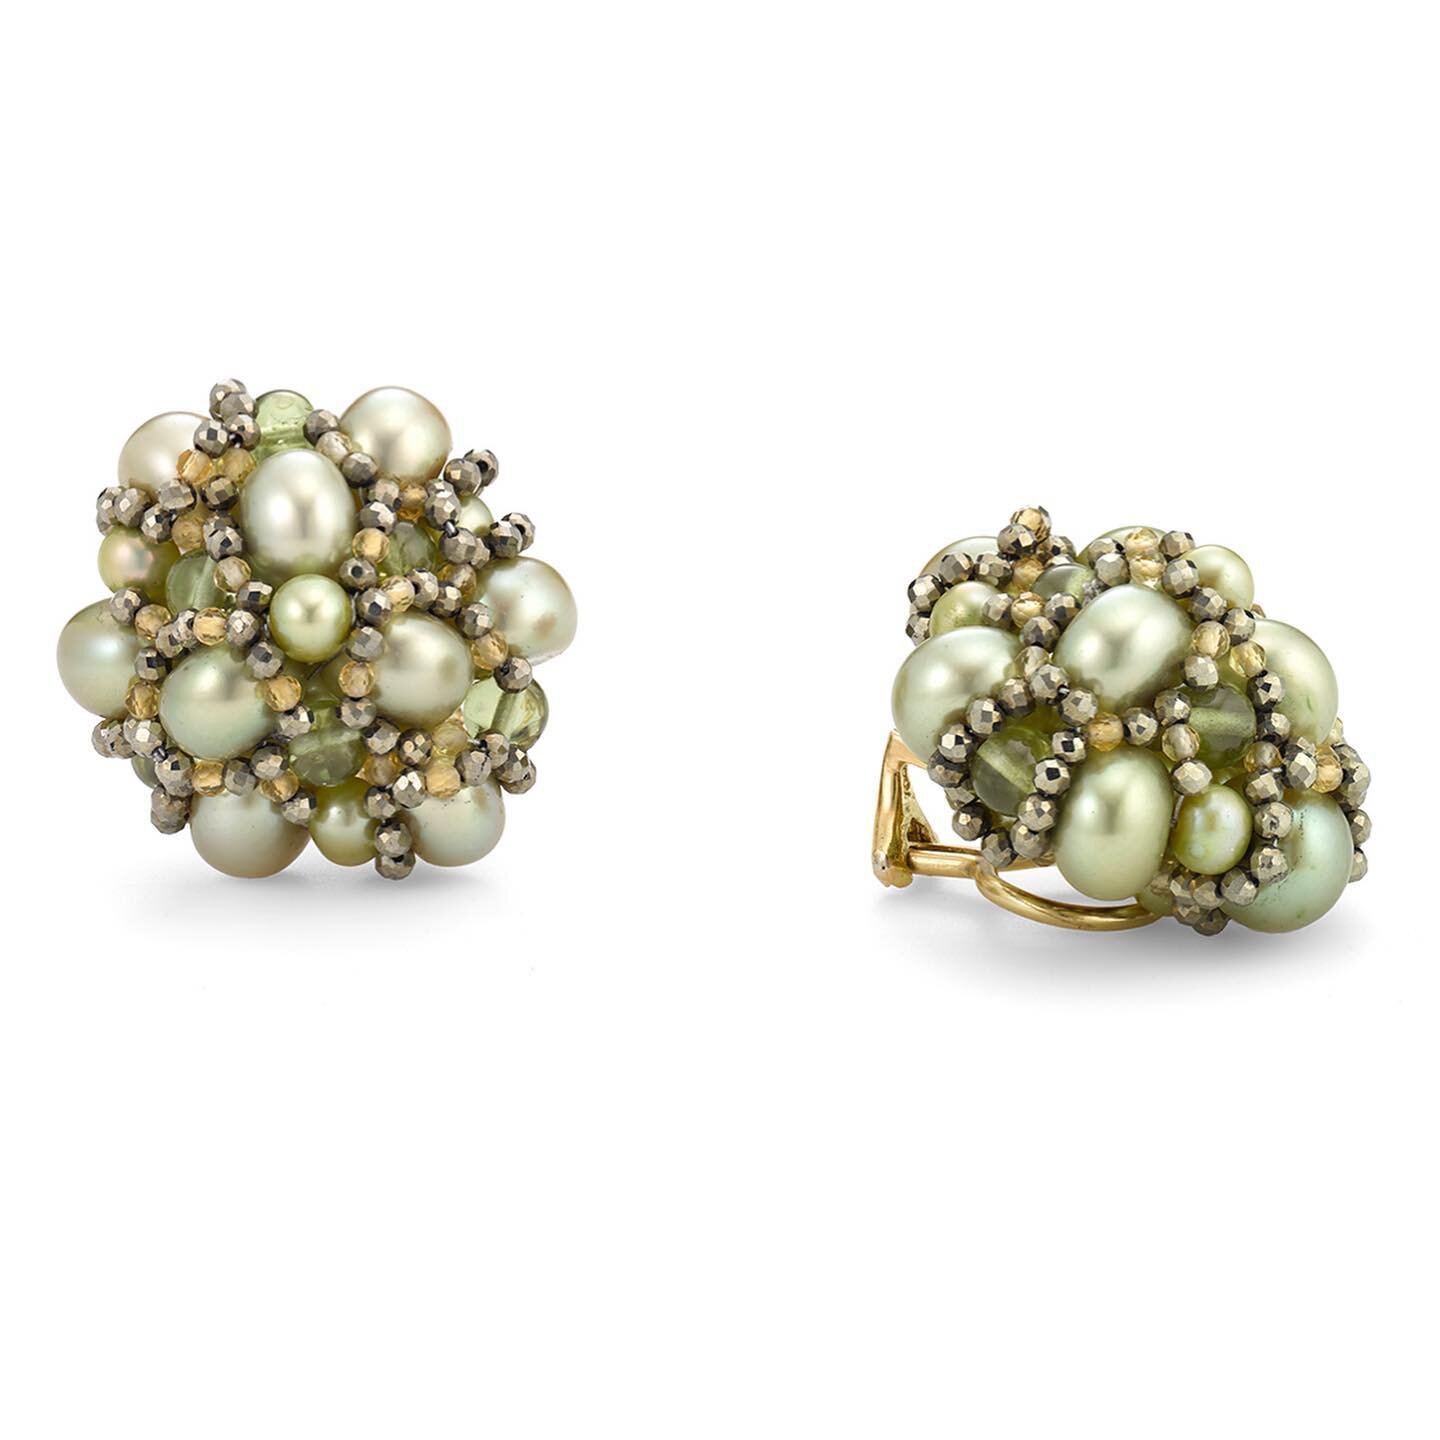 PAVLOVA&hellip;ear clips.  Peridot, Pearls, Citrine, 18K gold.  Bursting with verdant pearls, peridot and citrine, the bold and sensual shape of these ear clips recalls the luscious fullness of the peony.⁠
.⁠
.⁠
.⁠
.⁠
 #arttransforms #artinspiration 